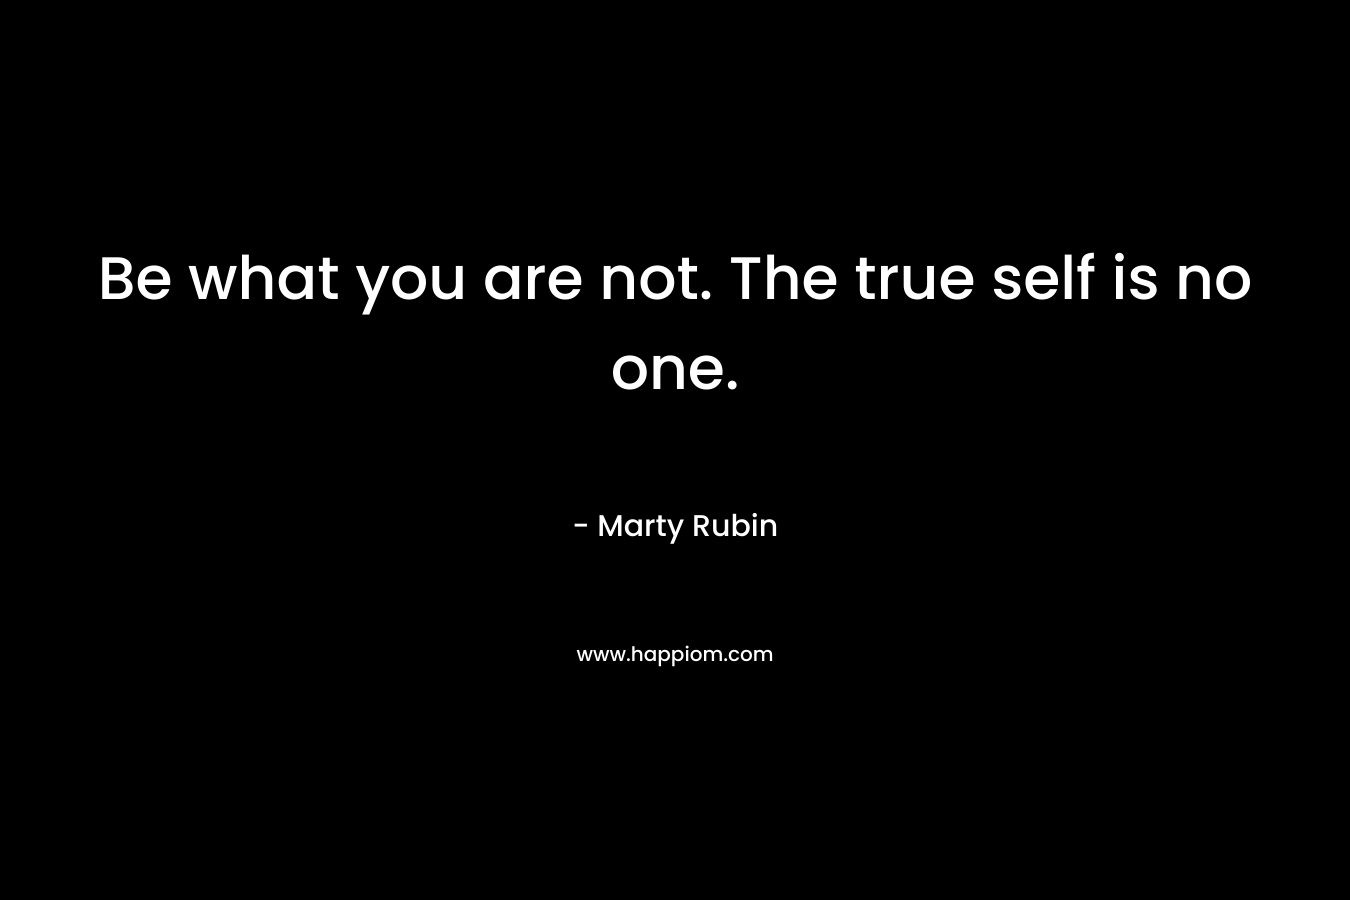 Be what you are not. The true self is no one.